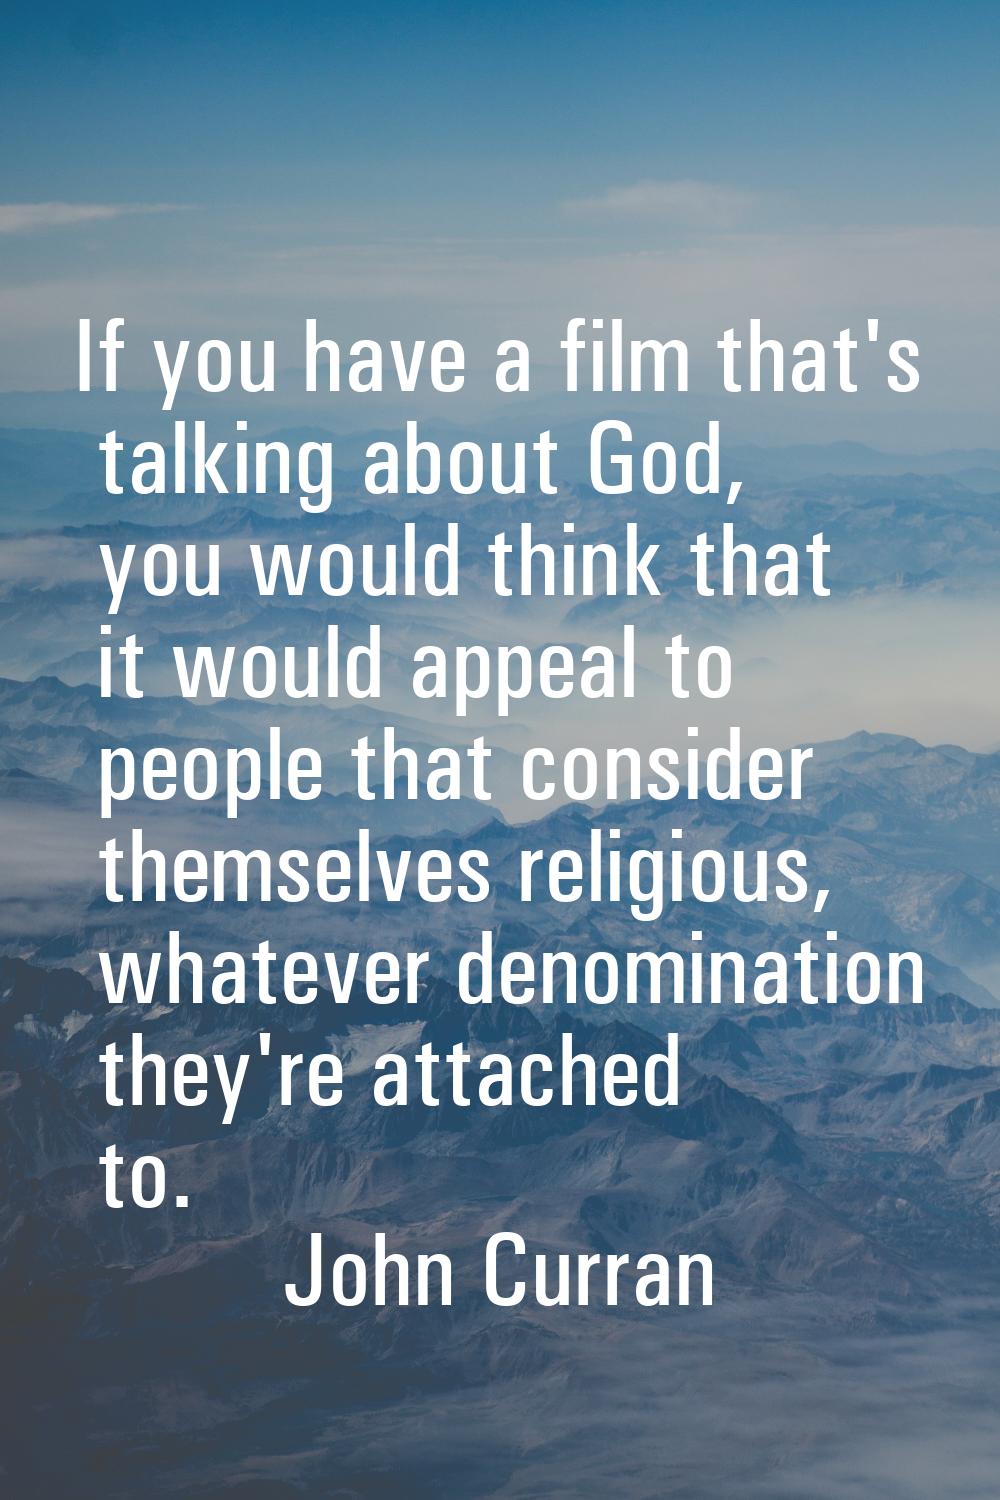 If you have a film that's talking about God, you would think that it would appeal to people that co